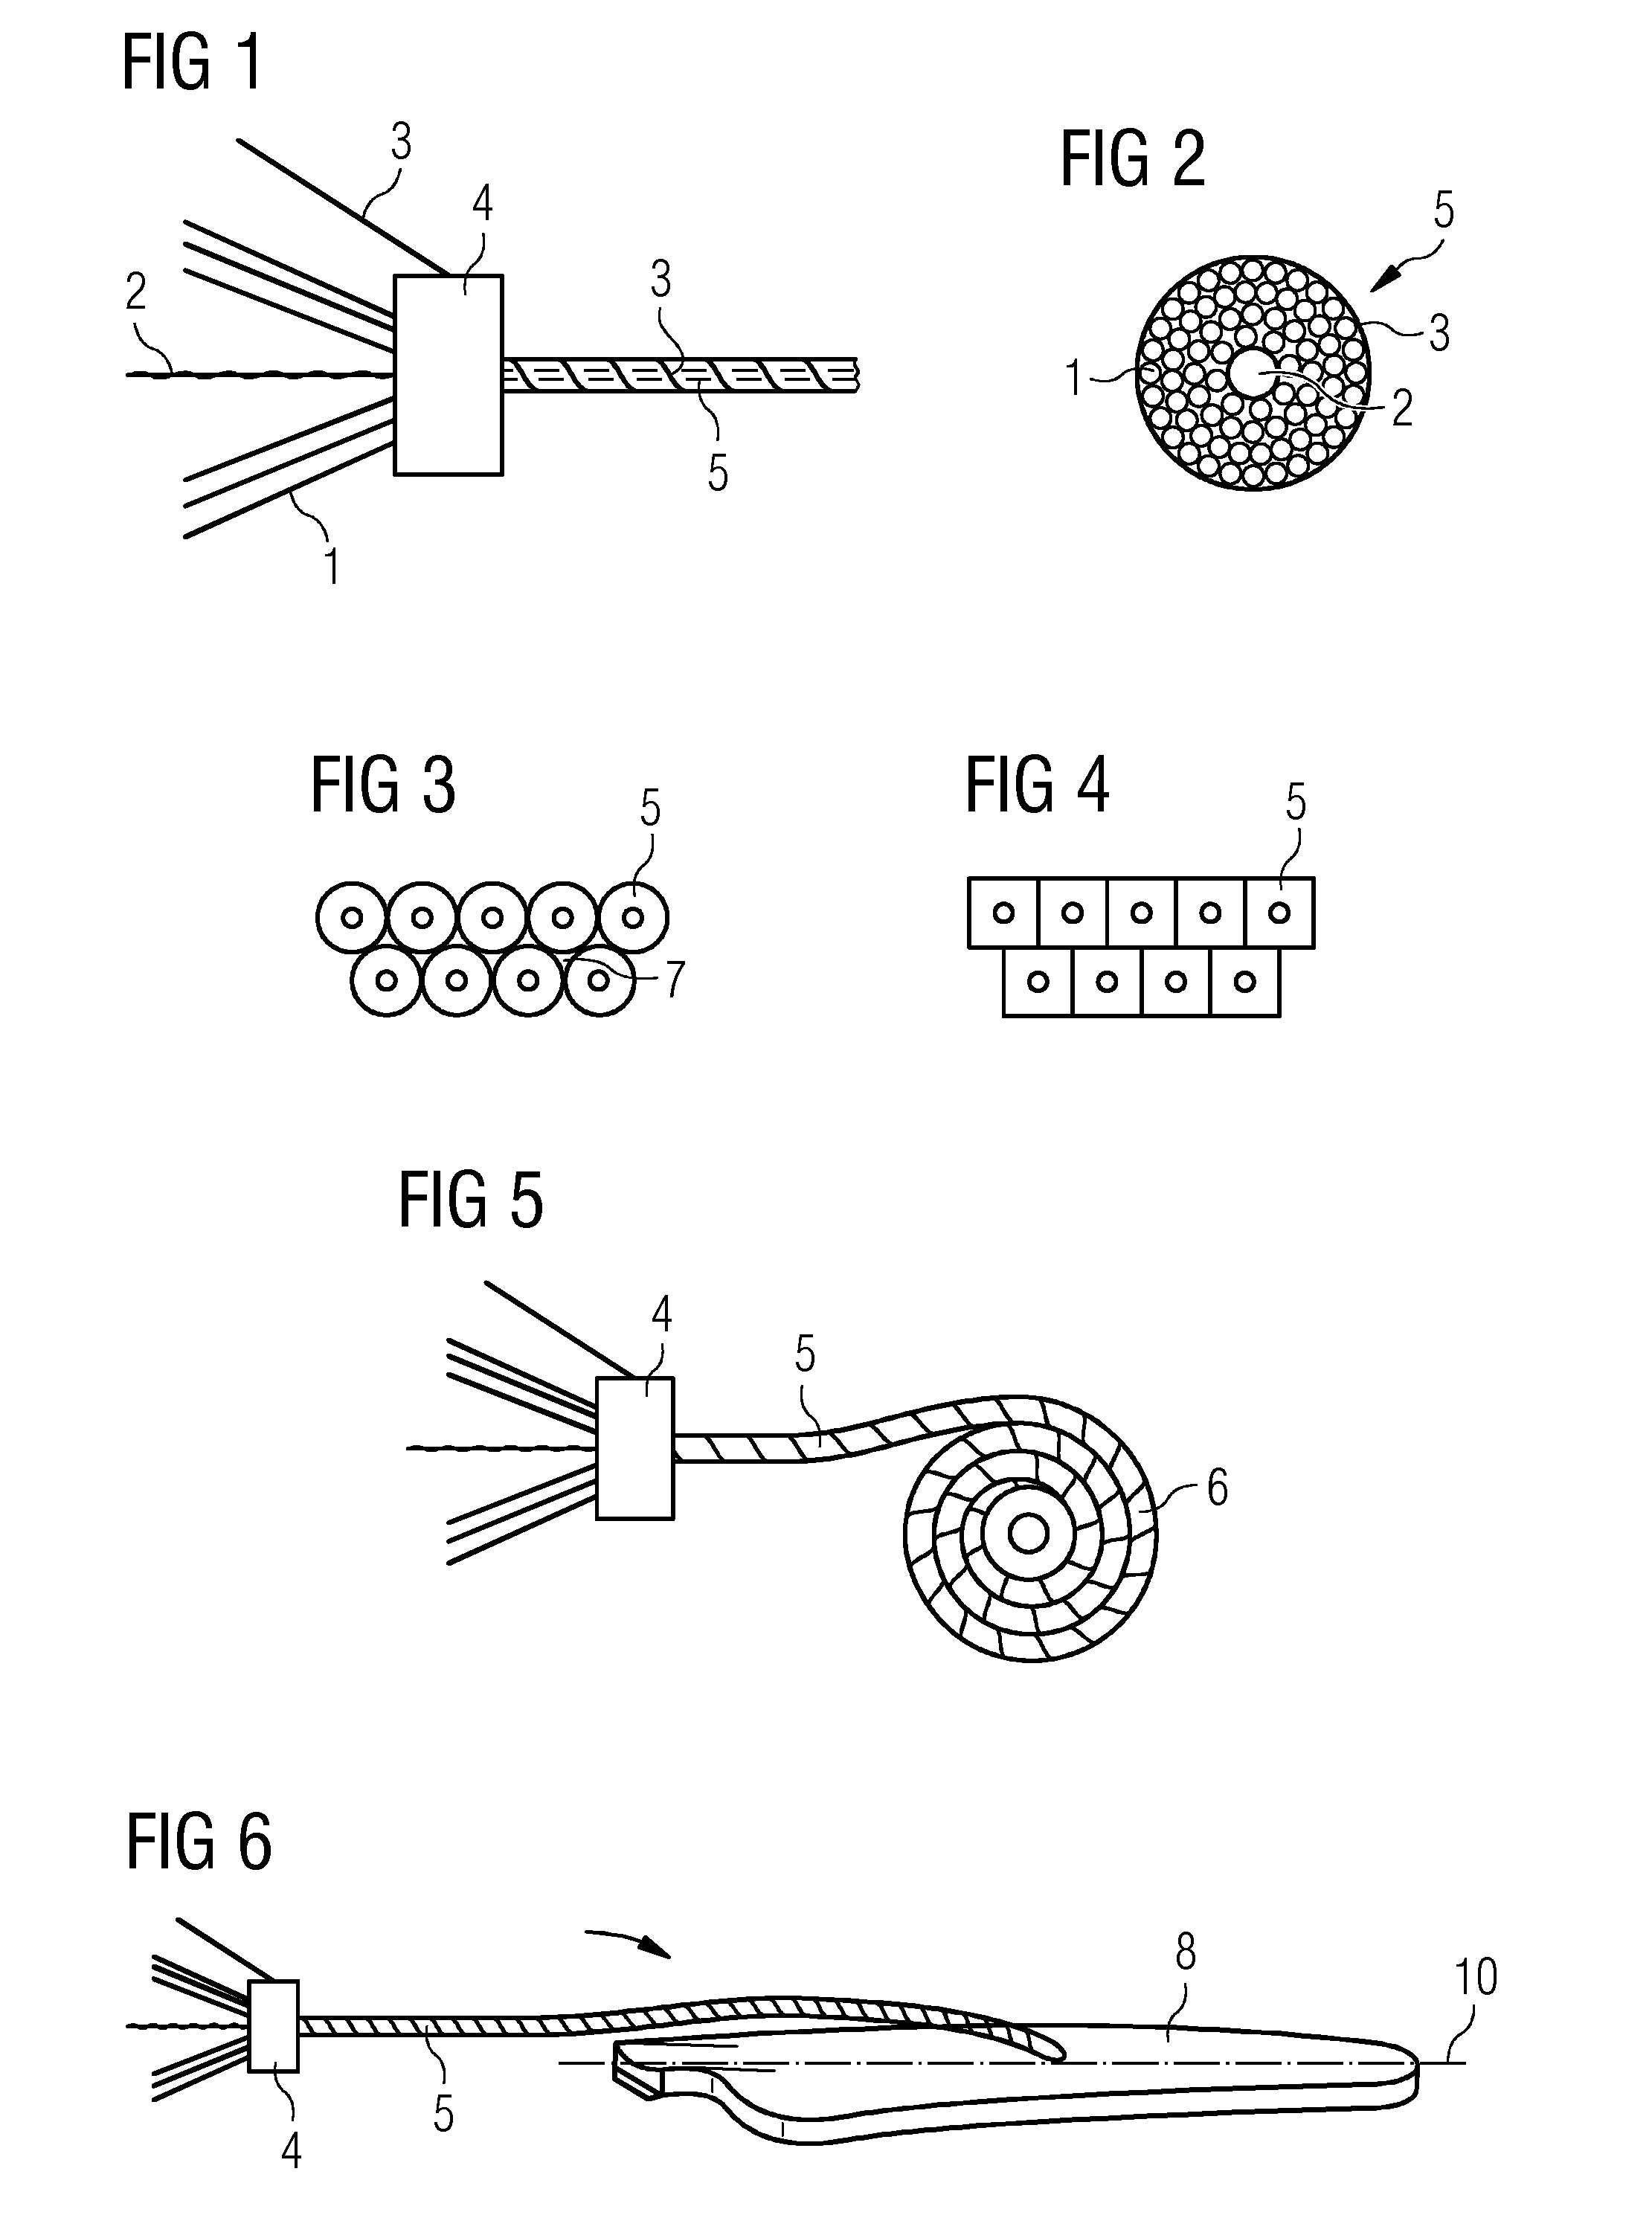 Bundle of roving yarns, method of manufacturing a bundle of roving yarns and method for manufacturing a work piece